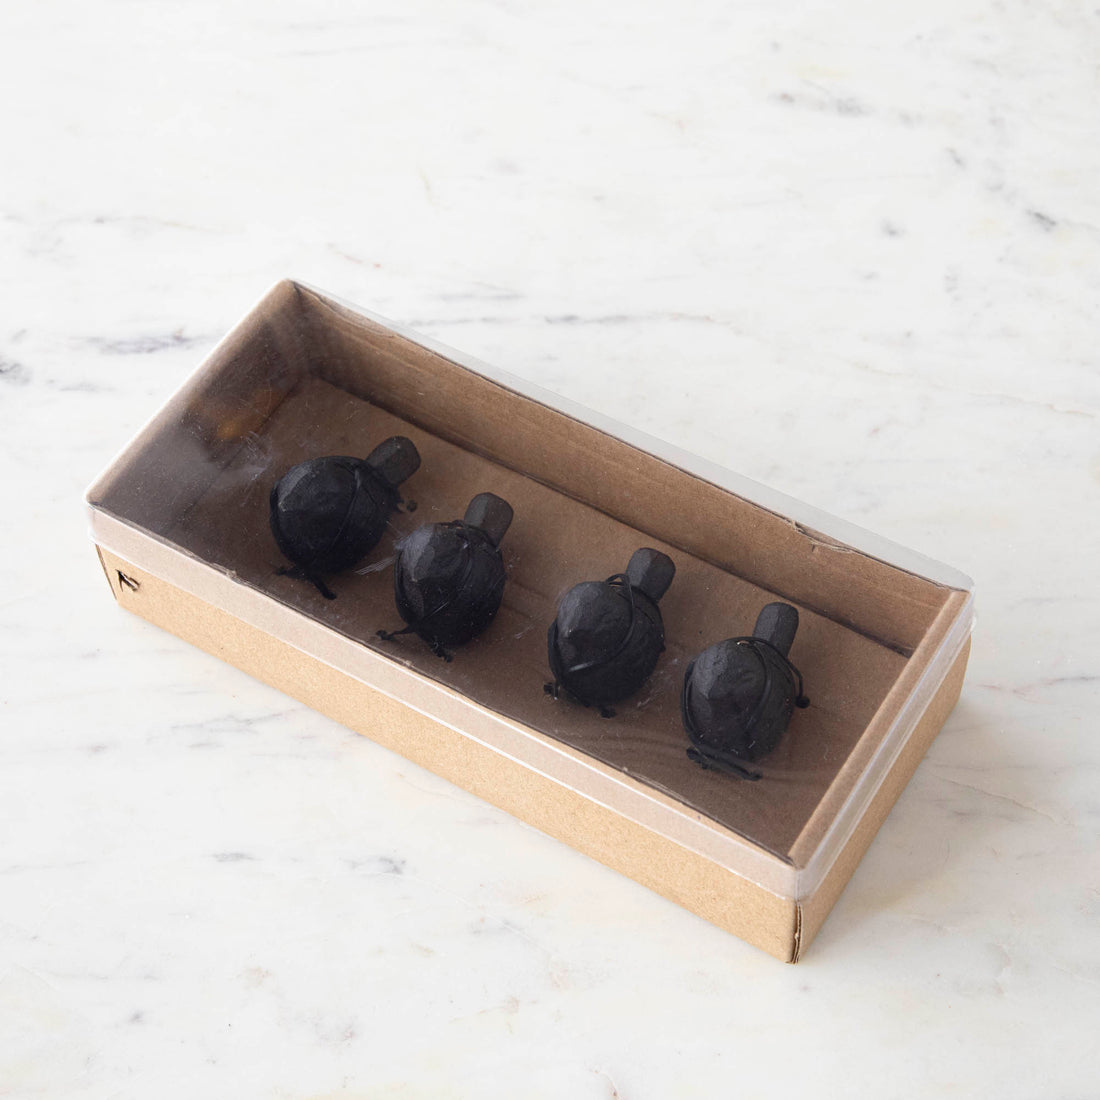 Four Cast Iron Songbird Place Card Holder sets of 4, by Park Hill, are arranged in a row on a wooden surface.